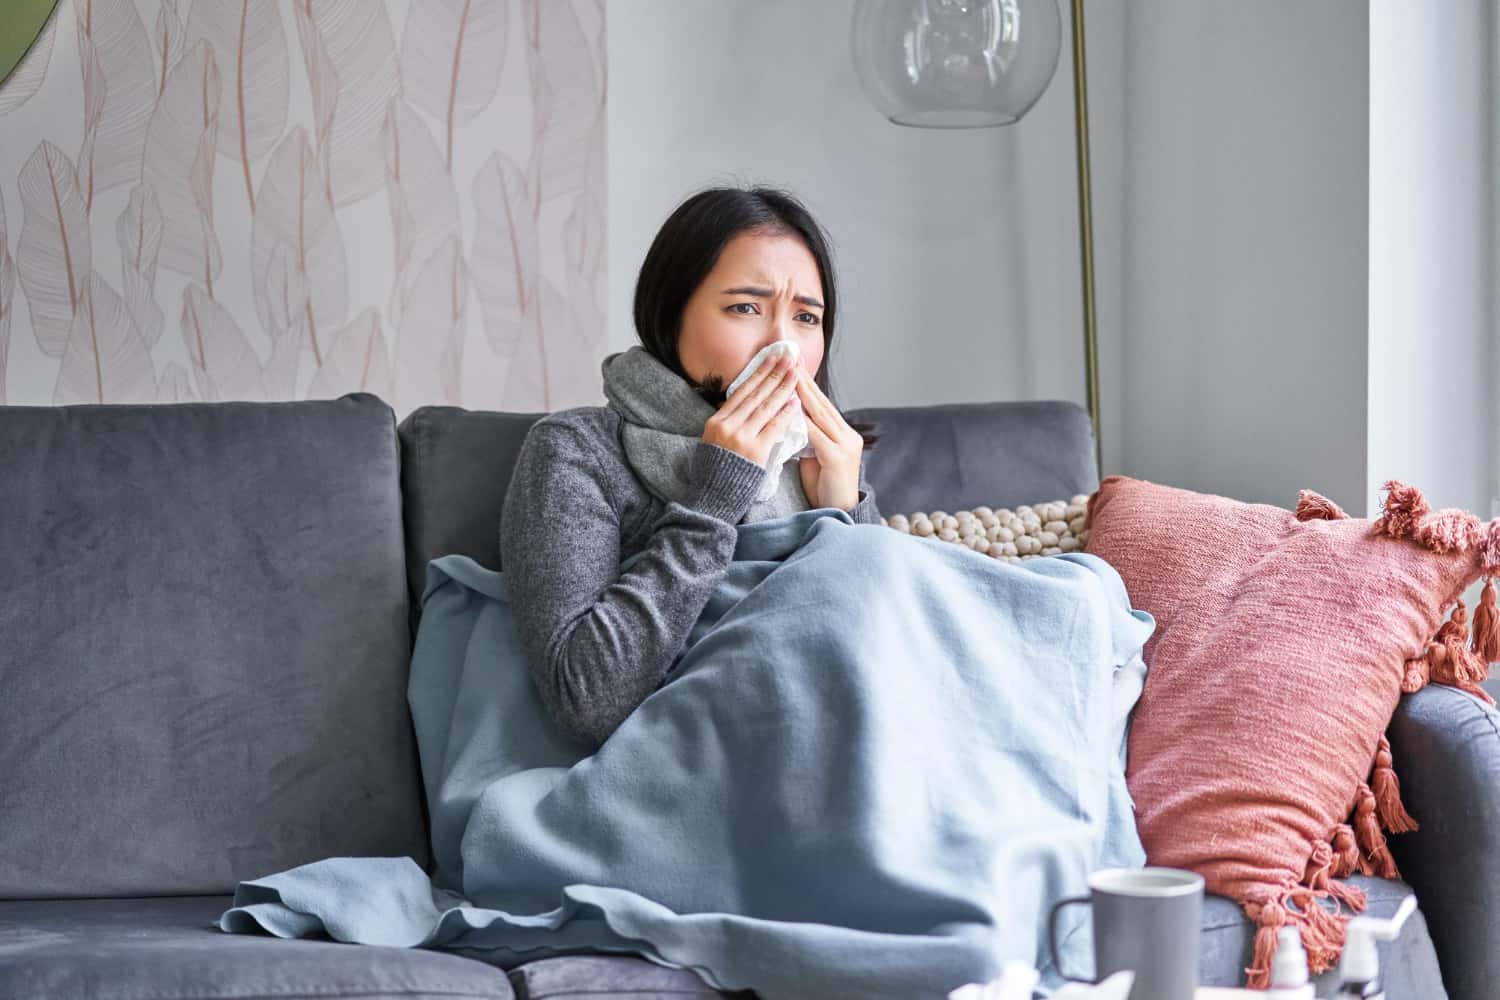 Effects of 'long colds' Could be as Common as 'long Covid': Says Study